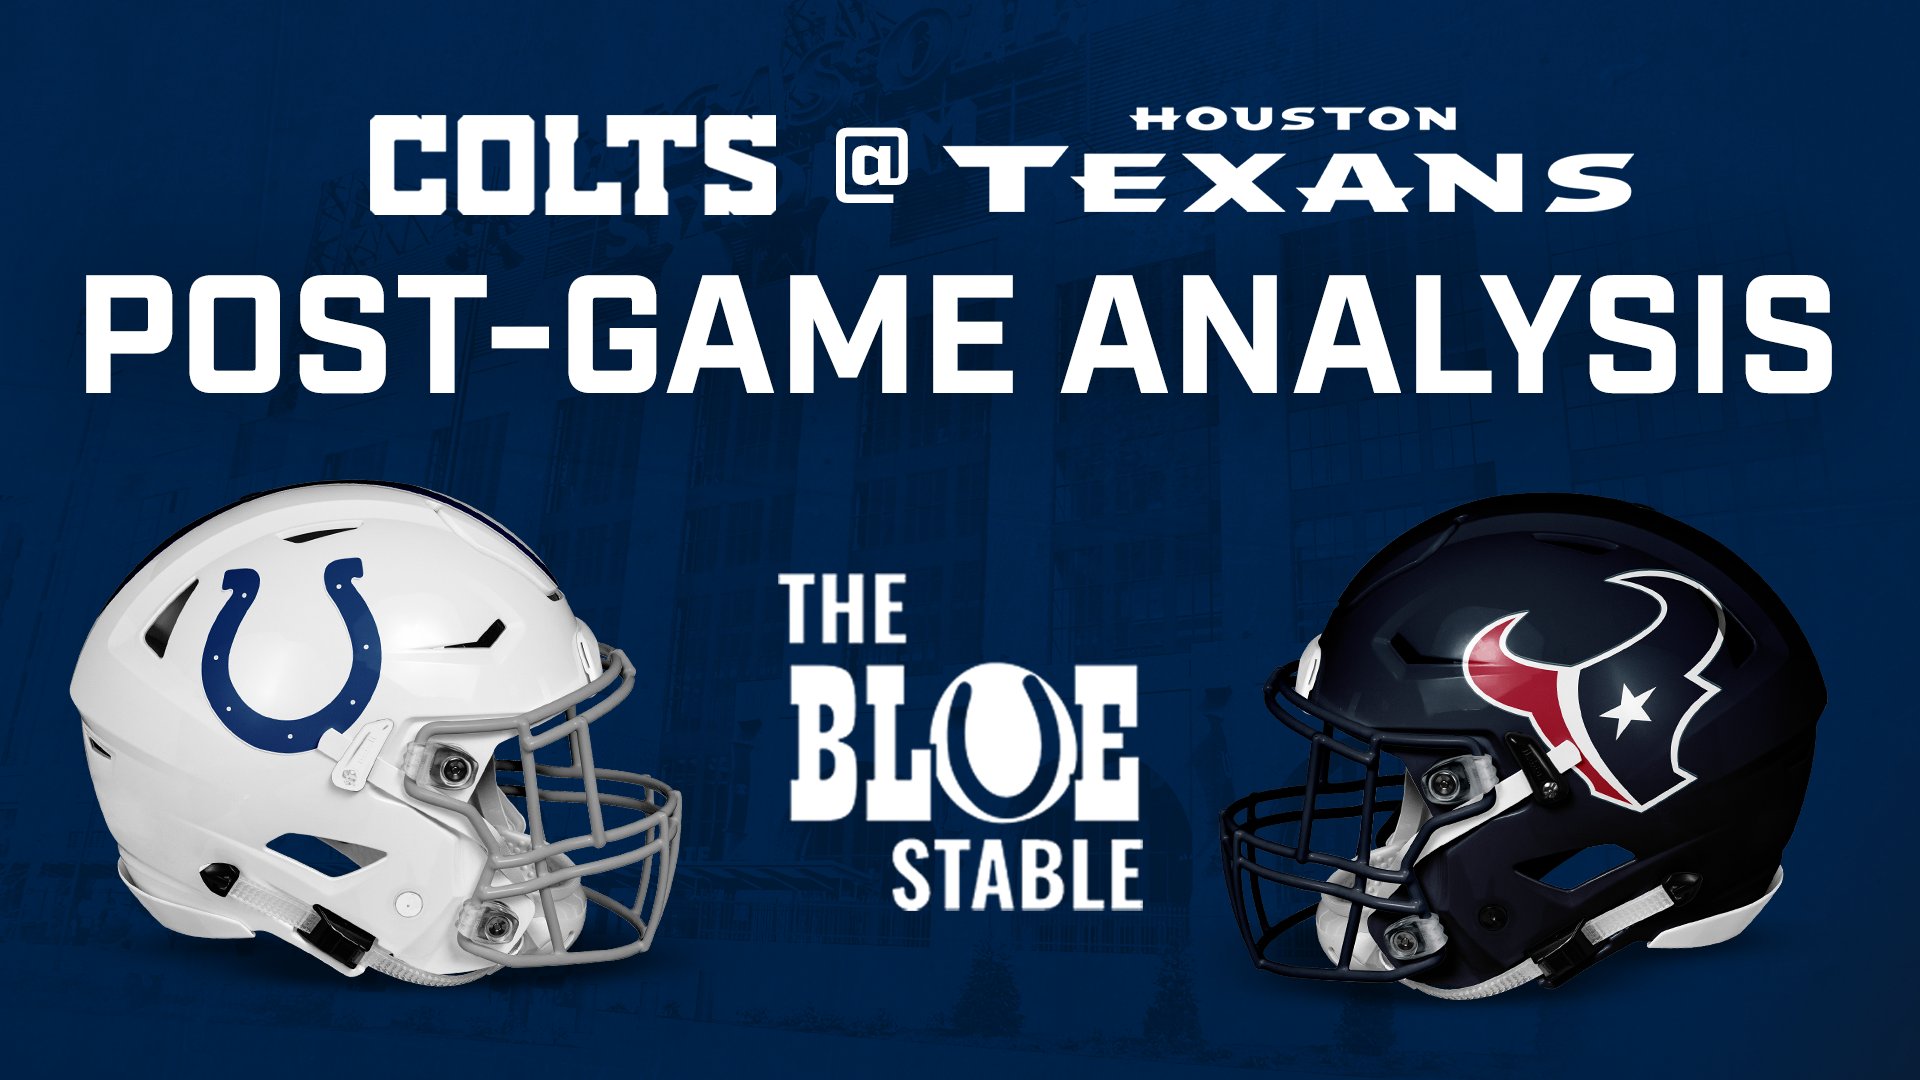 A tie? Here is what went right and what went wrong for the Colts in Houston: